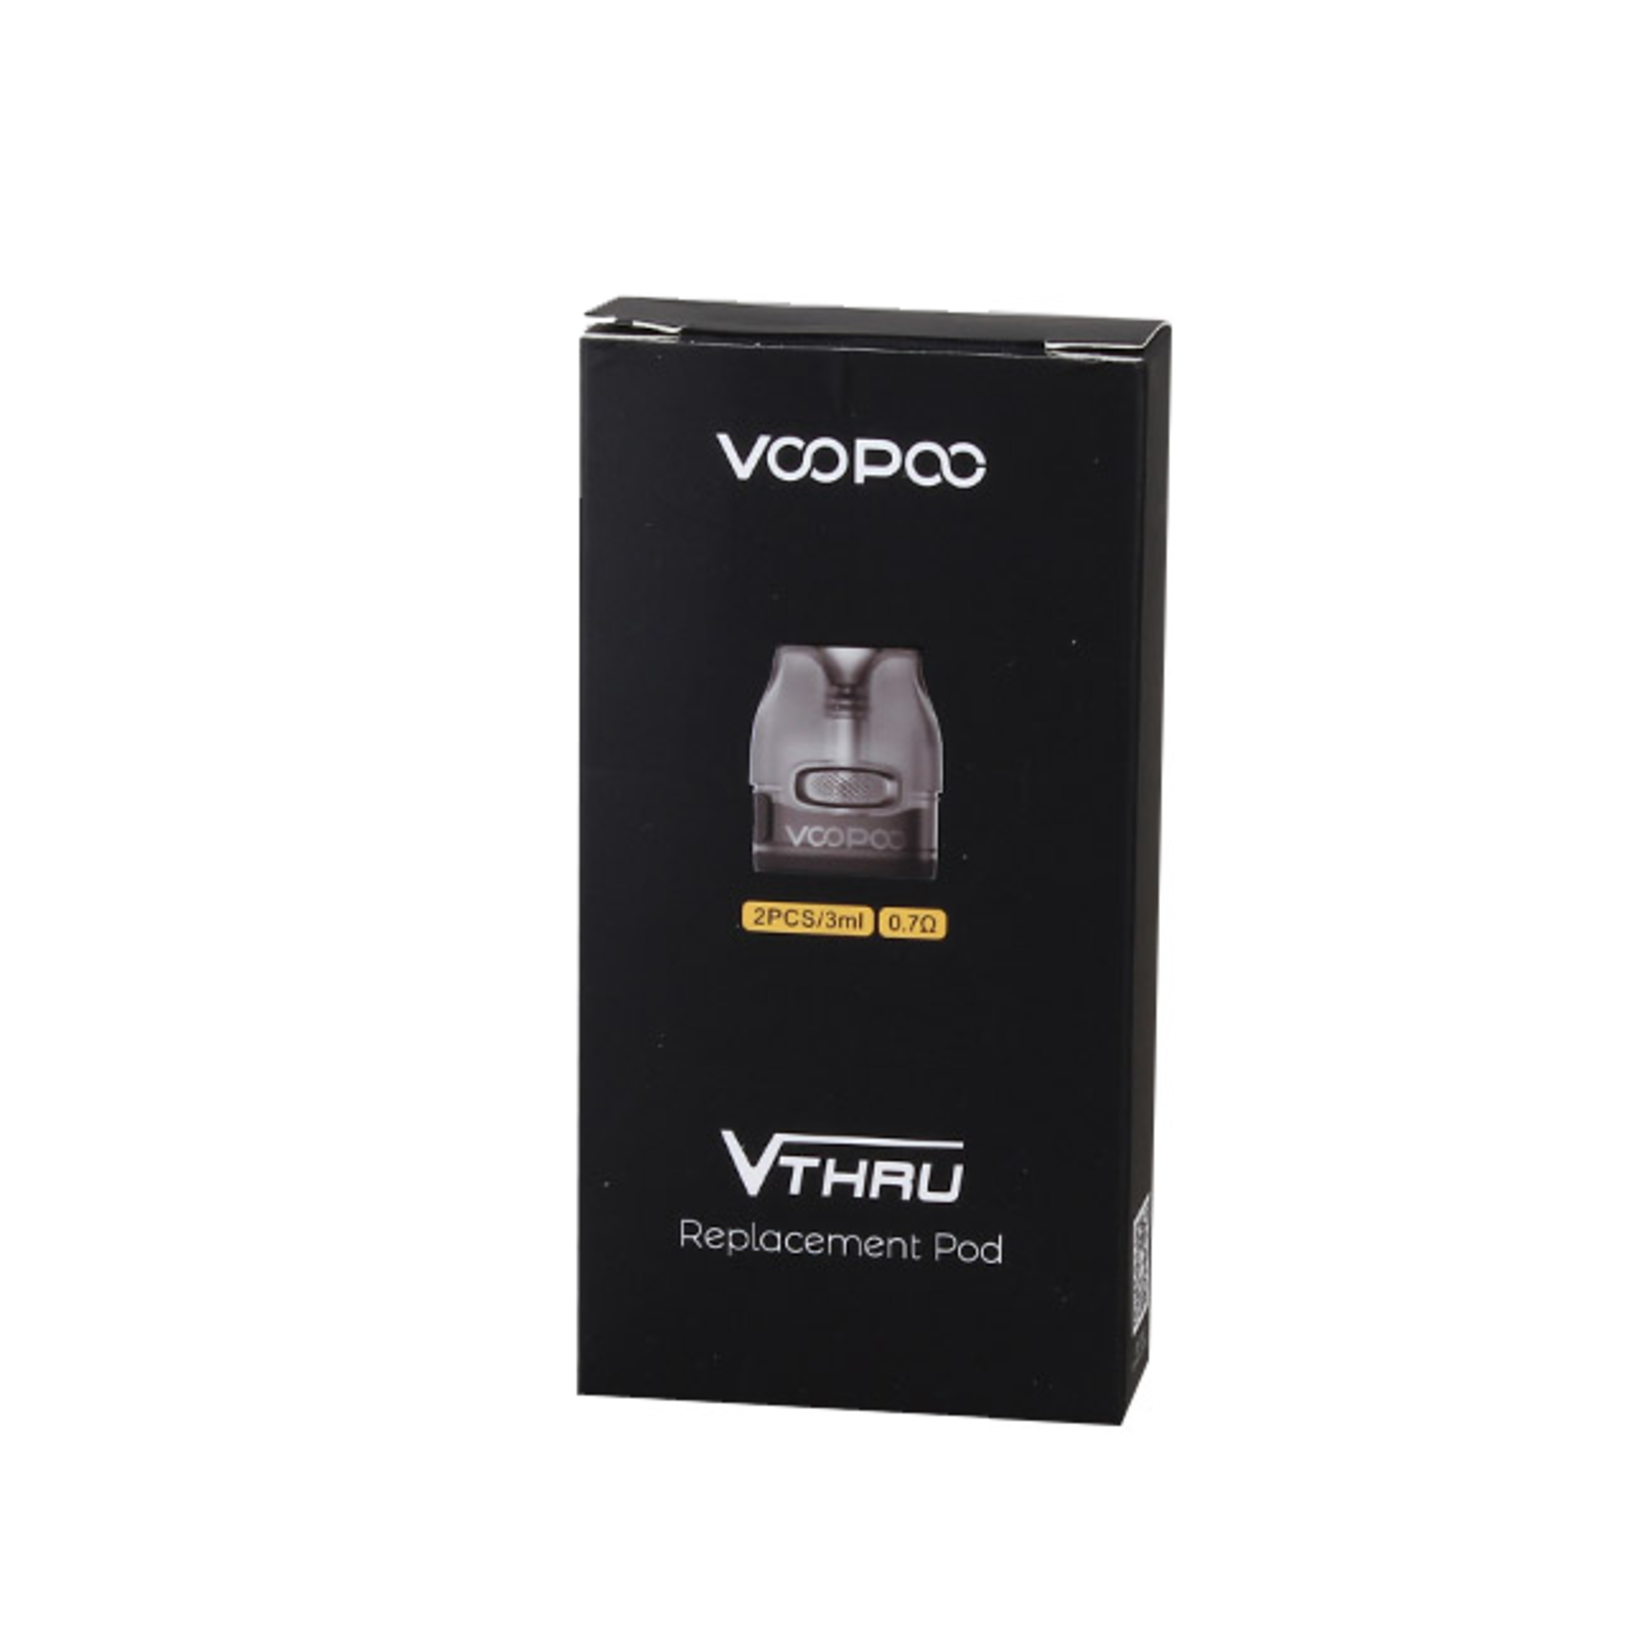 VooPoo VooPoo V.THRU Pro / VMATE Pod Replacement Pods 2pk